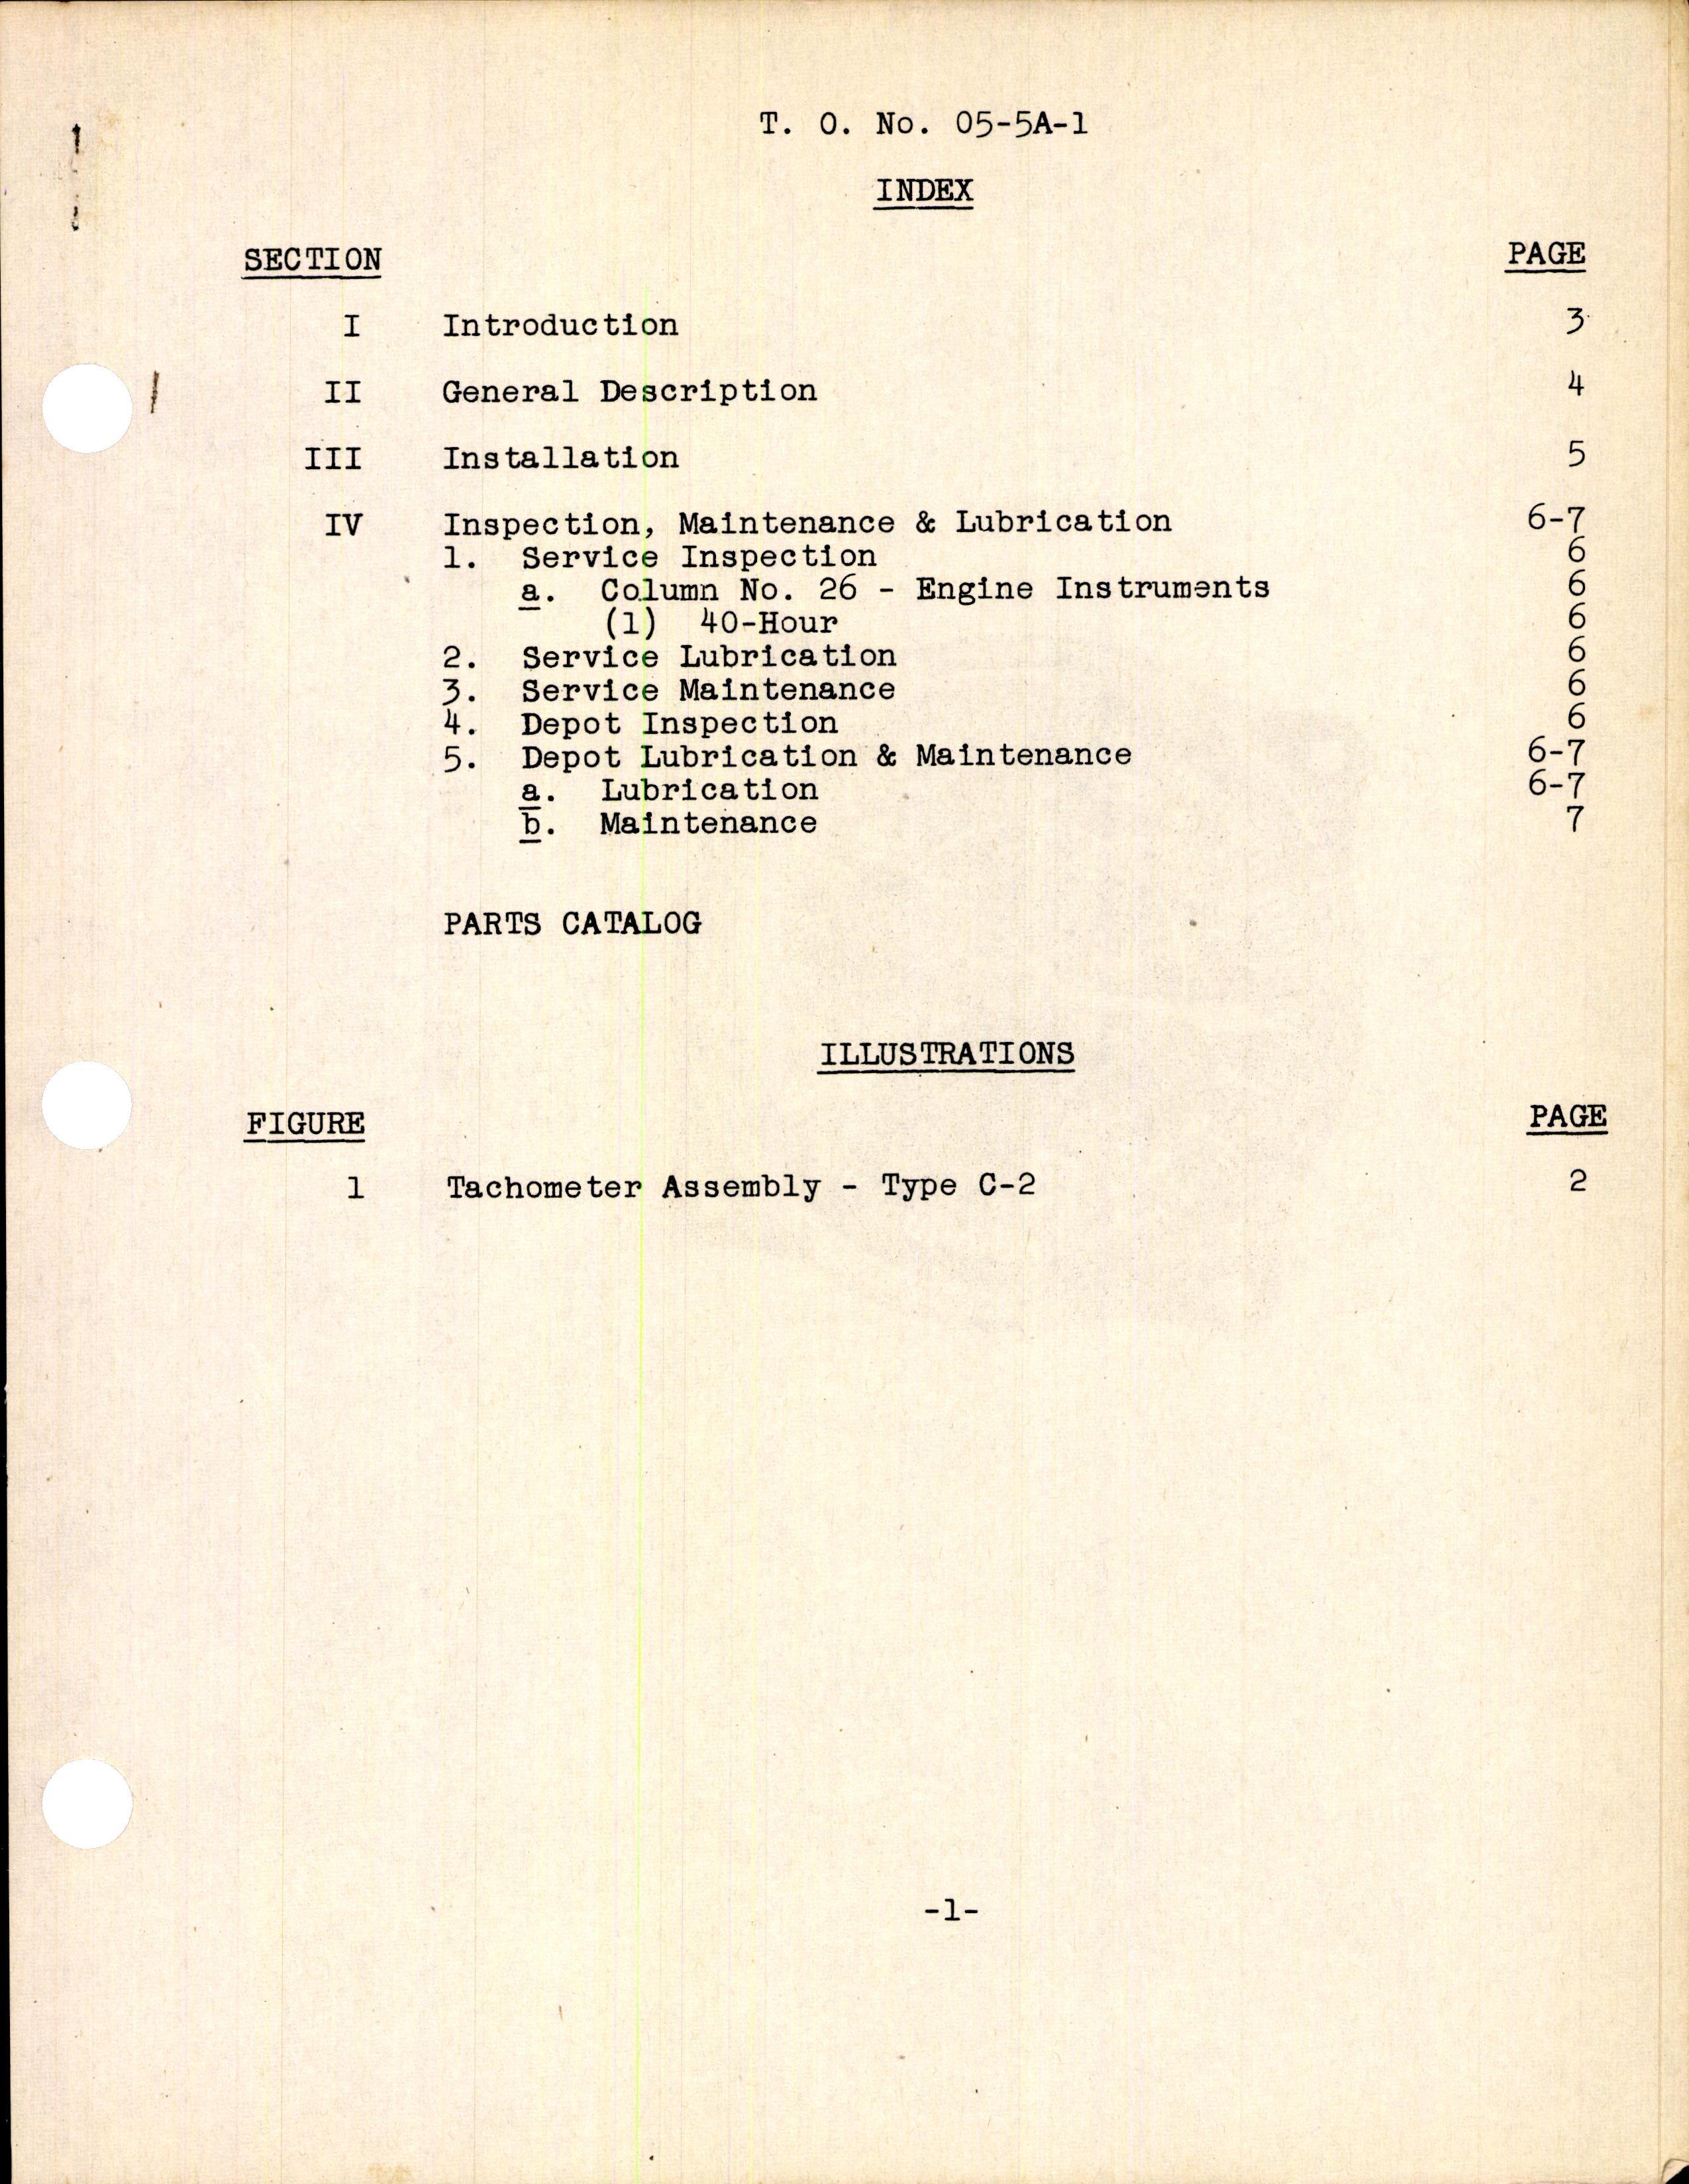 Sample page 3 from AirCorps Library document: Handbook of Instructions with Parts Catalog for the Type C-2 Tachometer